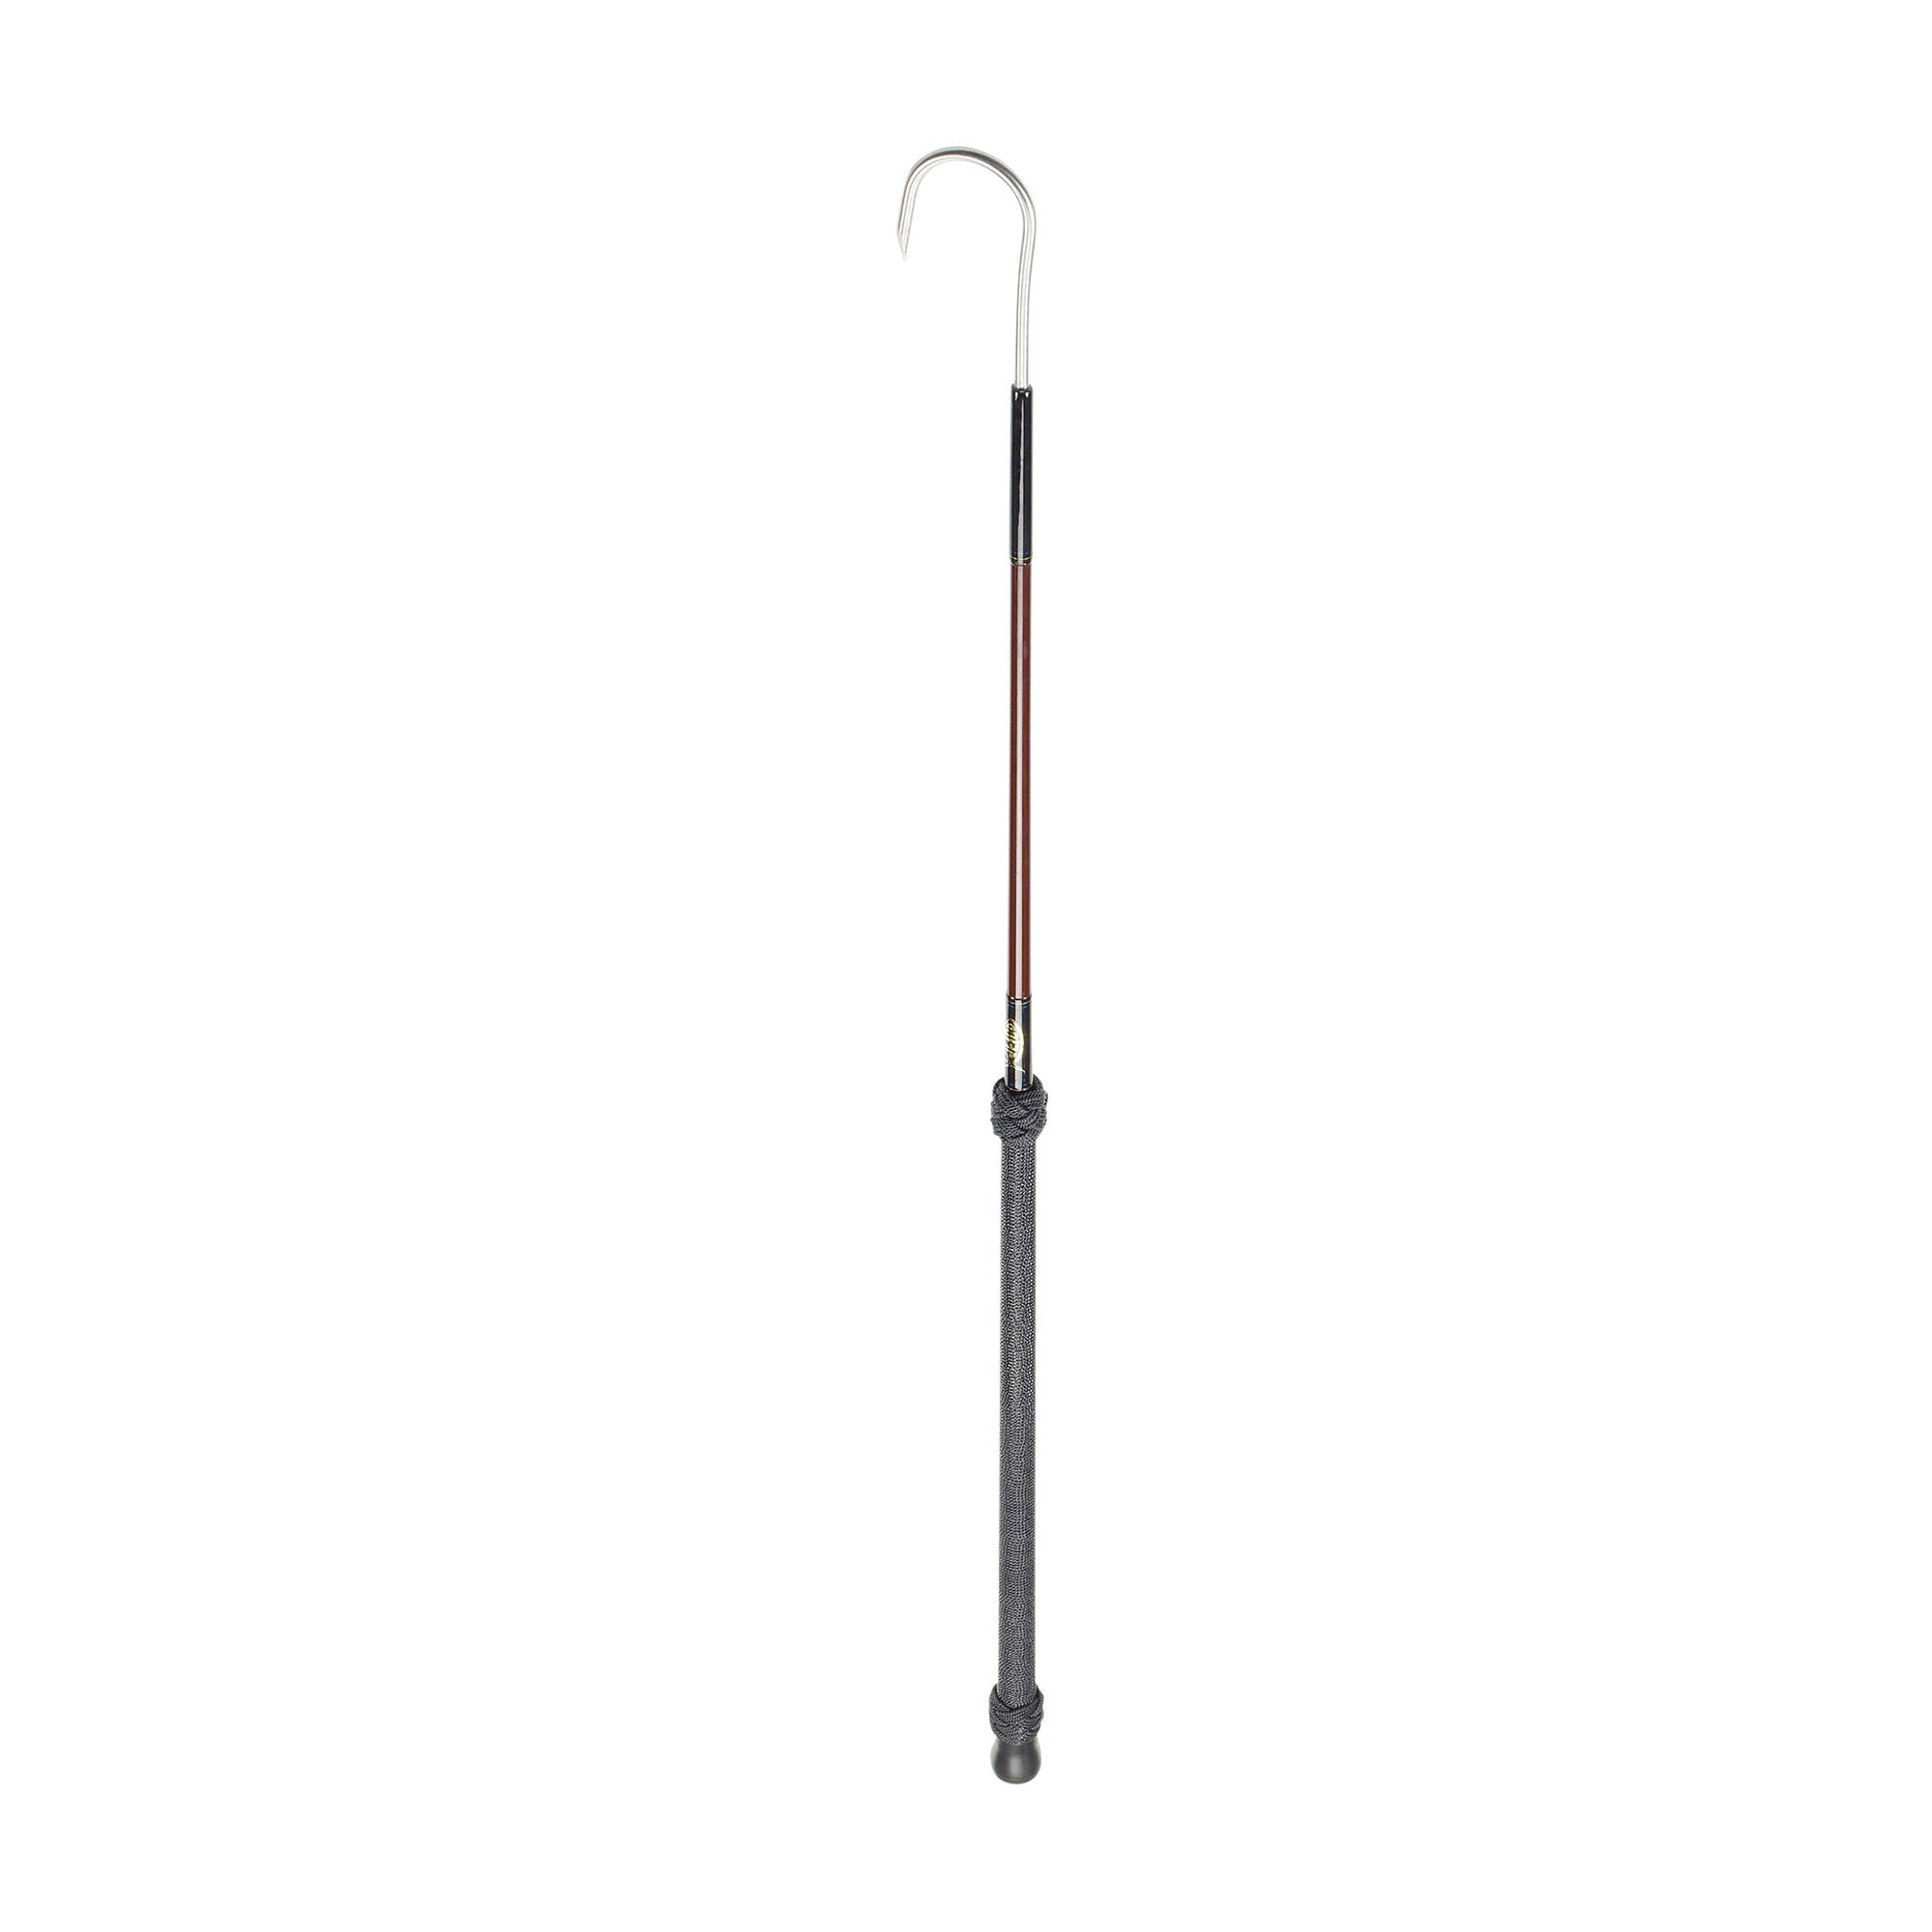 AFW - Gaff, 3 in / 7.6 cm, Stainless Steel Hook, 6 ft / 1.8 m Aluminum  Shaft with Foam Grip [NO INTERNATIONAL SHIPPING] 